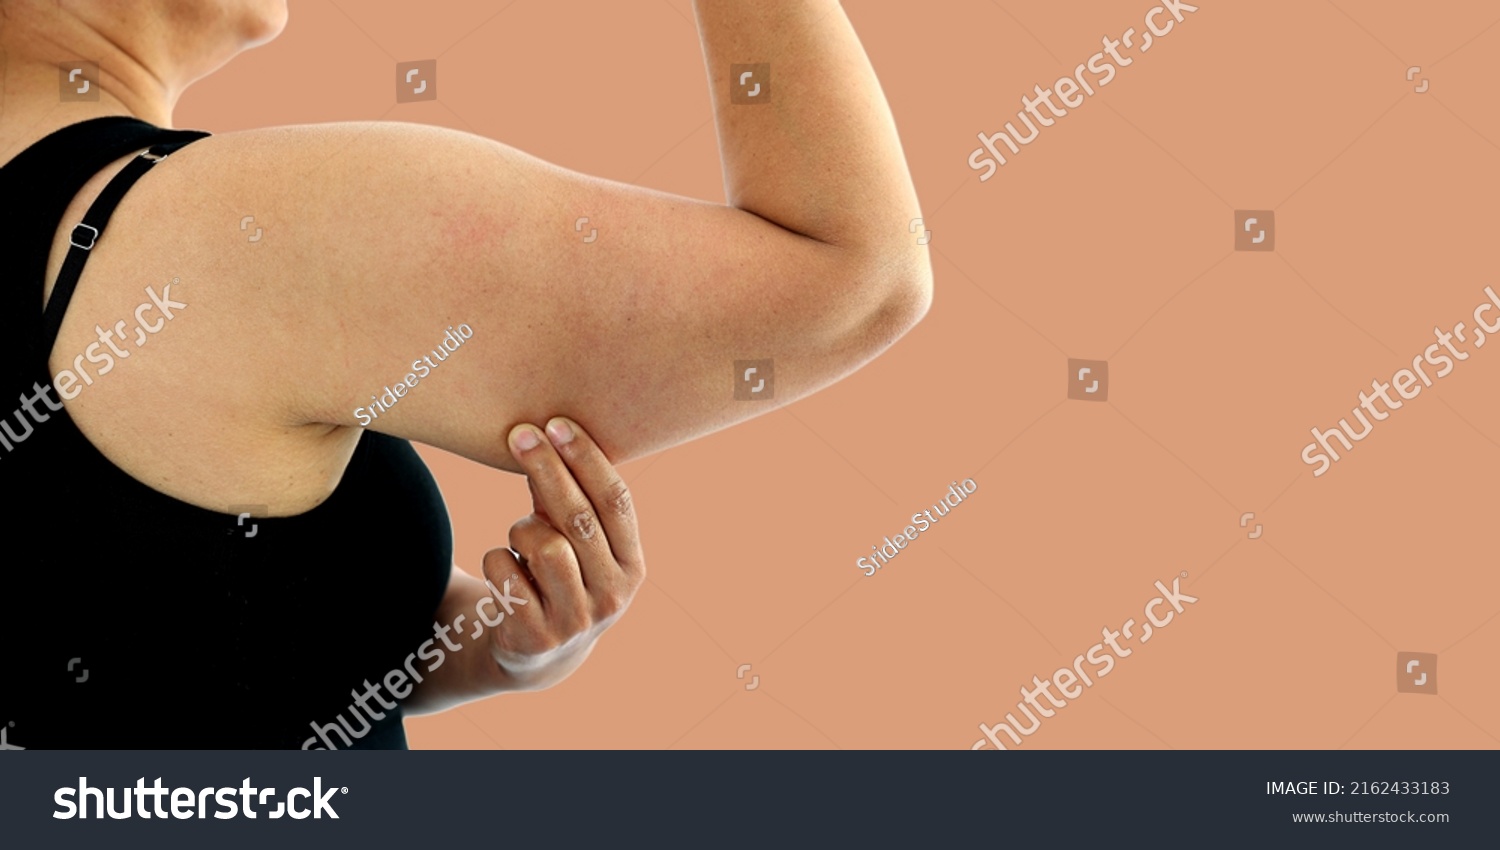 A young Asian woman grabbing skin on her upper arm with excess fat isolated on a white background. Pinching the loose and saggy muscles. Overweight concept #2162433183